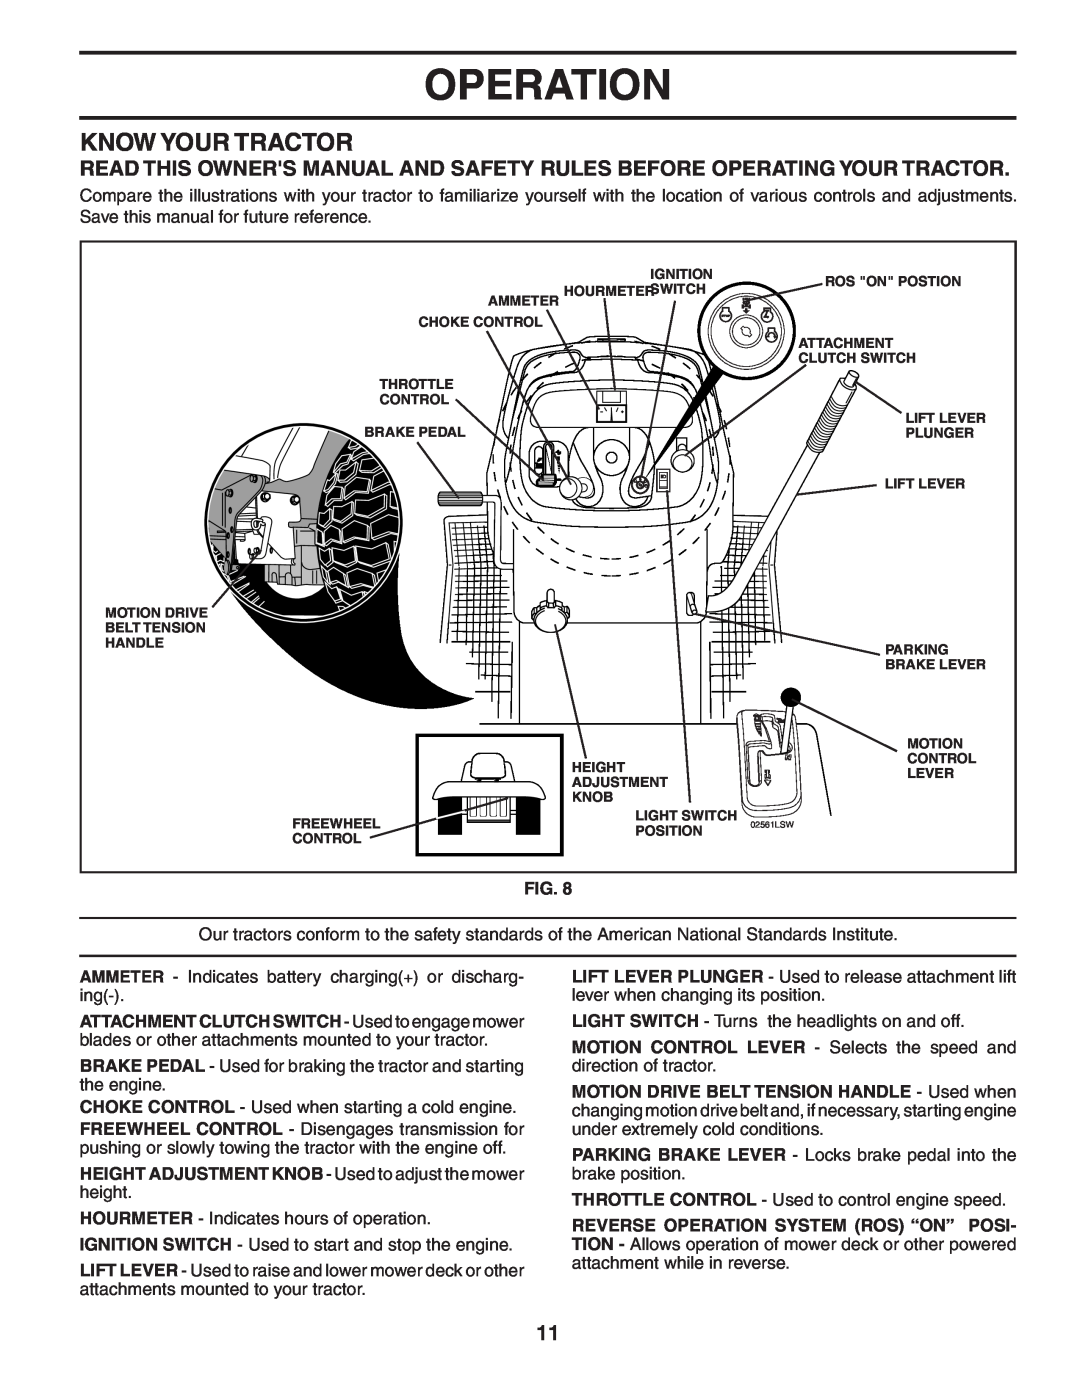 Poulan PKGTH2554 manual Know Your Tractor, Operation 